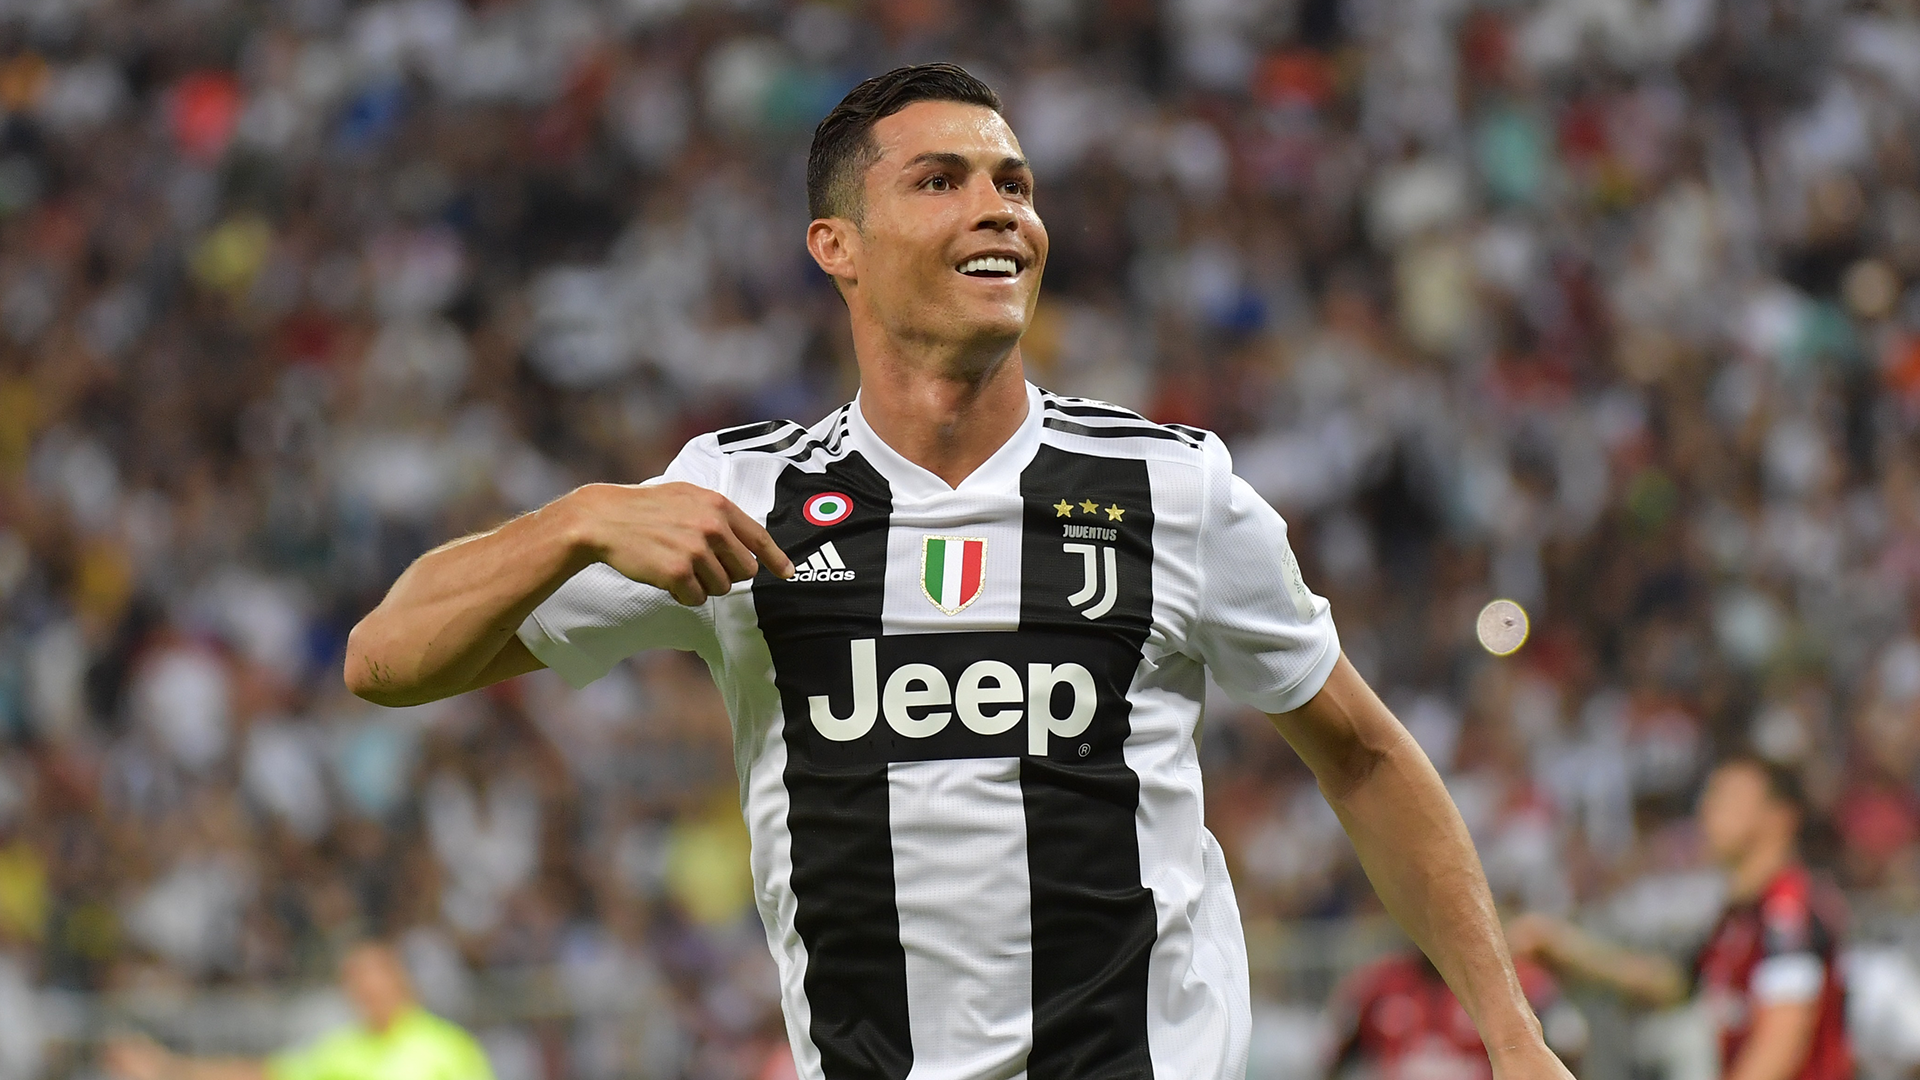 Cristiano Ronaldo At Juventus: Goals, Assists, Results & Fixtures In 2019 20